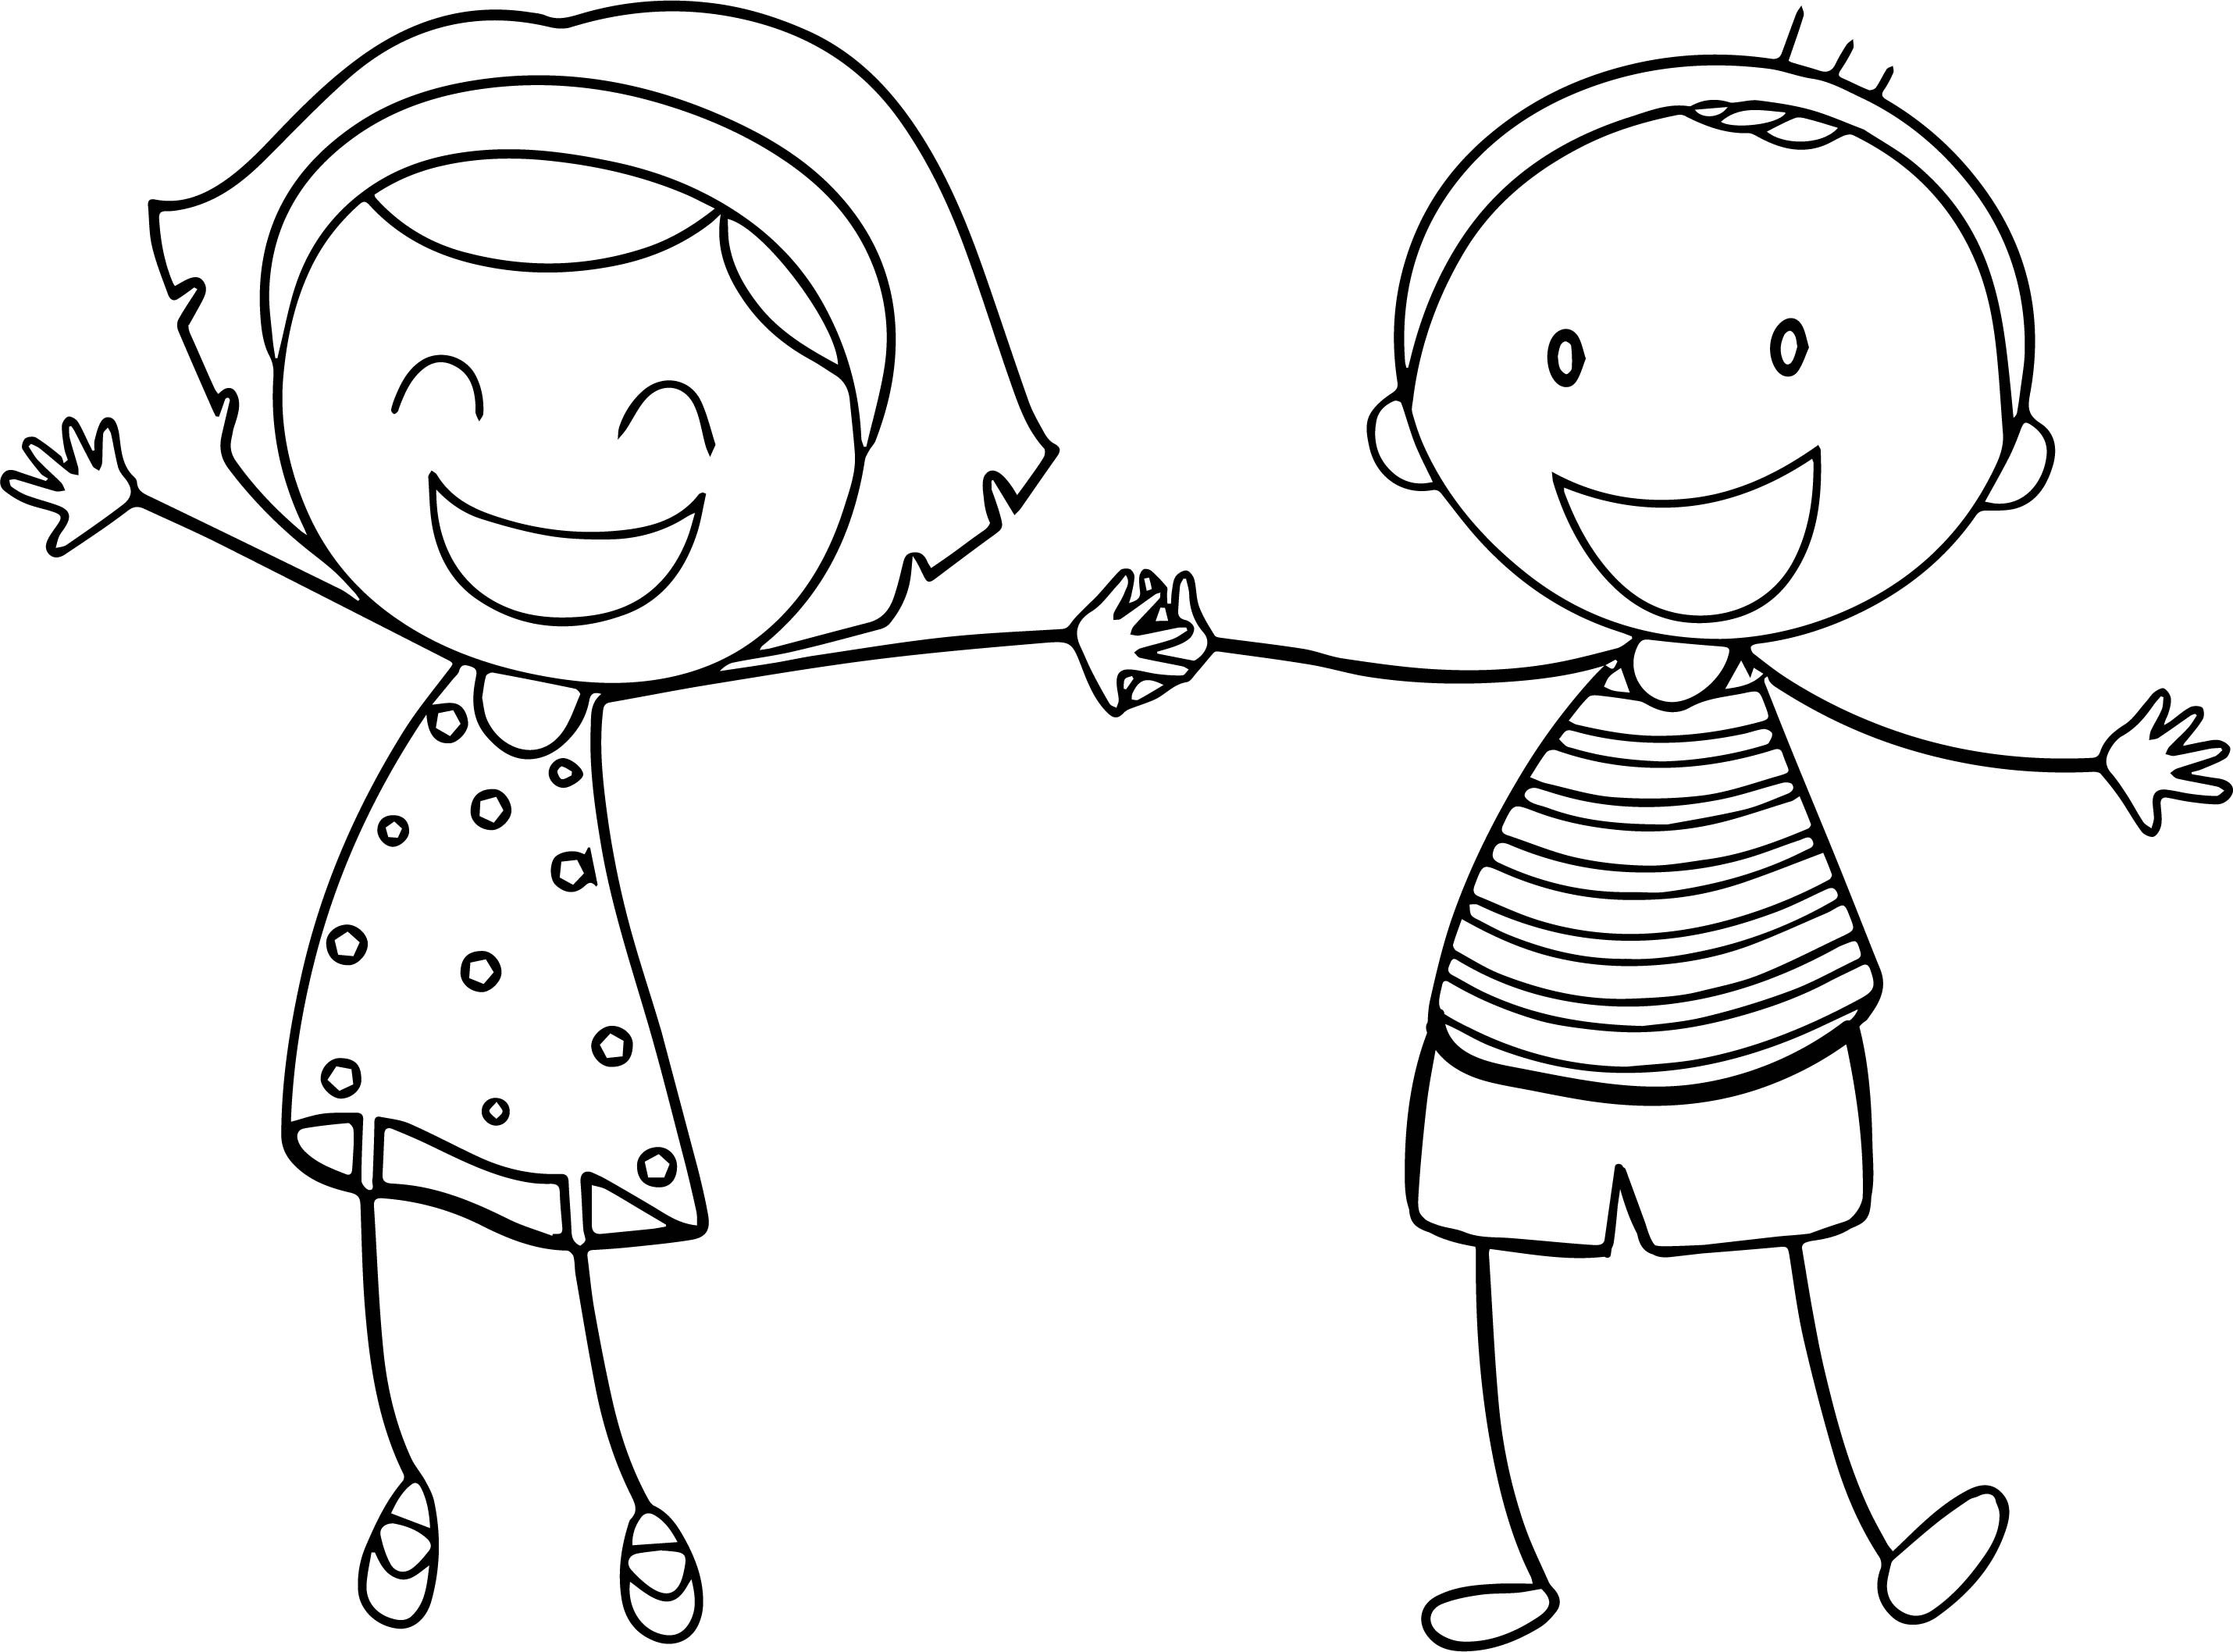 Coloring Sheets For Girls The Birthday Boy
 Boy And Girl Coloring Pages Interior design ideas